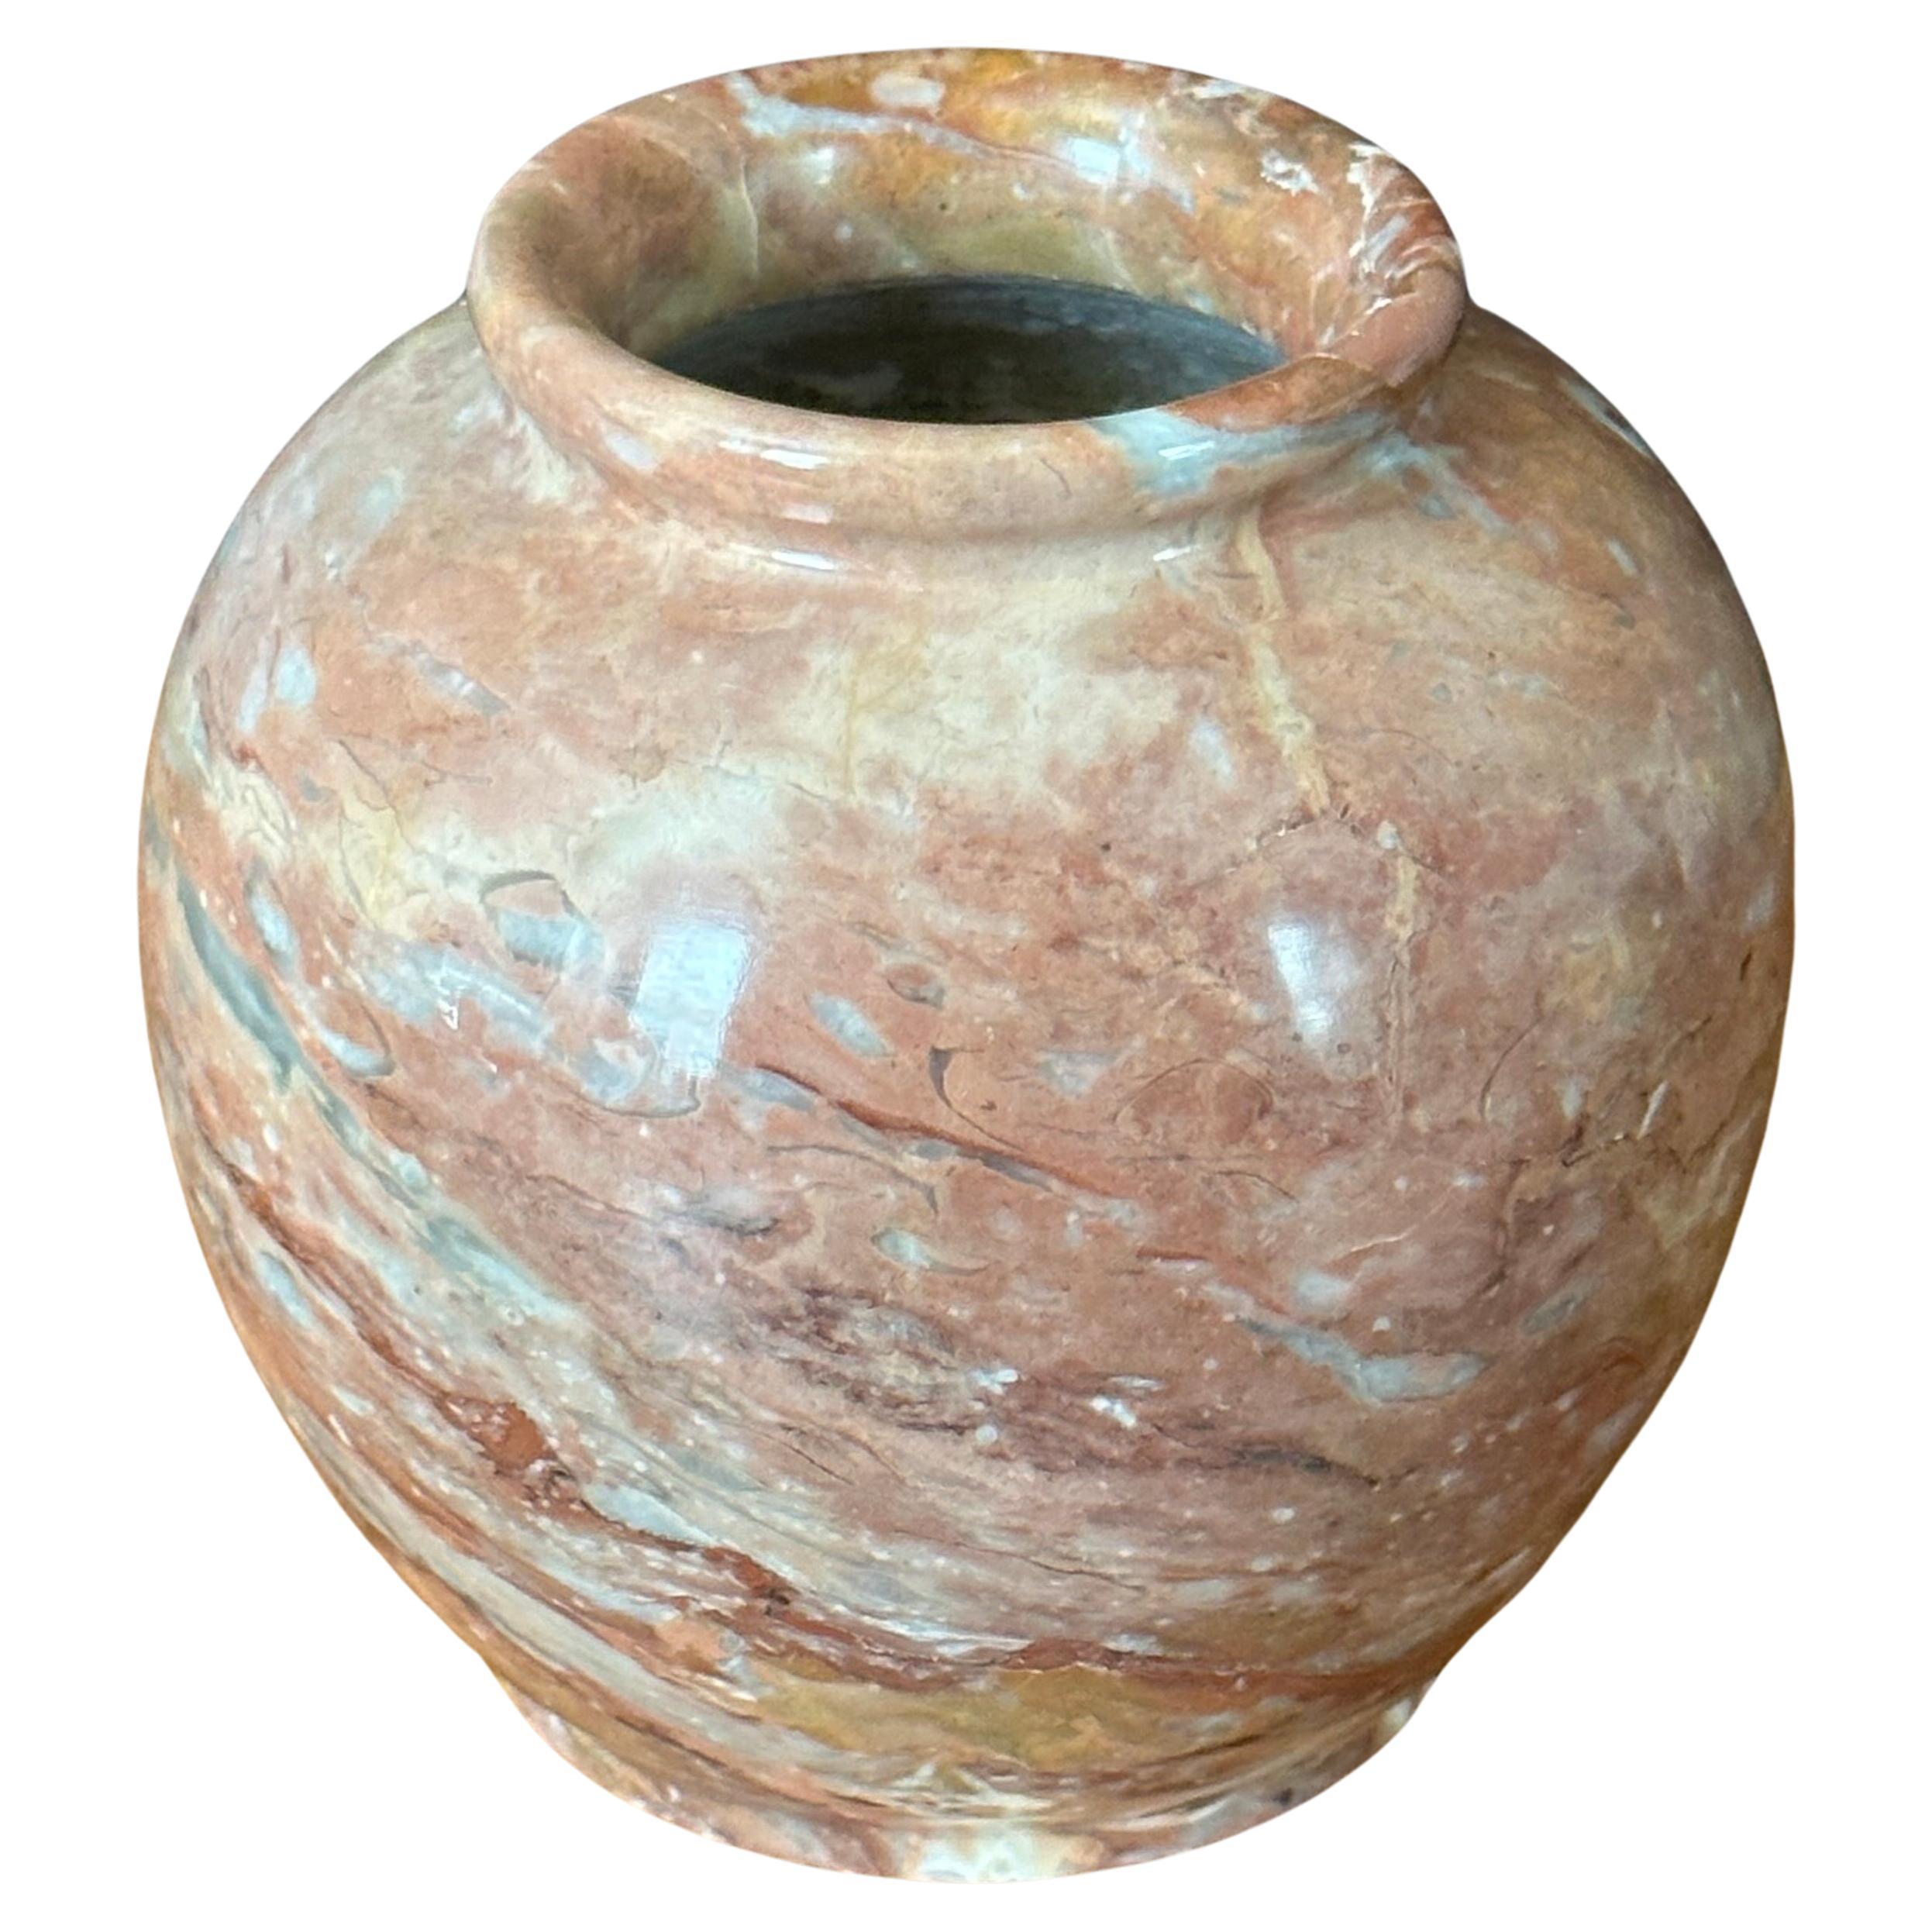 Small post-modern Italian marble vase, circa 1980s. The vase is primarily a dark tan in color, but has cream, black and grey veining throughout. The vase is in very good vintage condition with no chips or cracks and measures 5